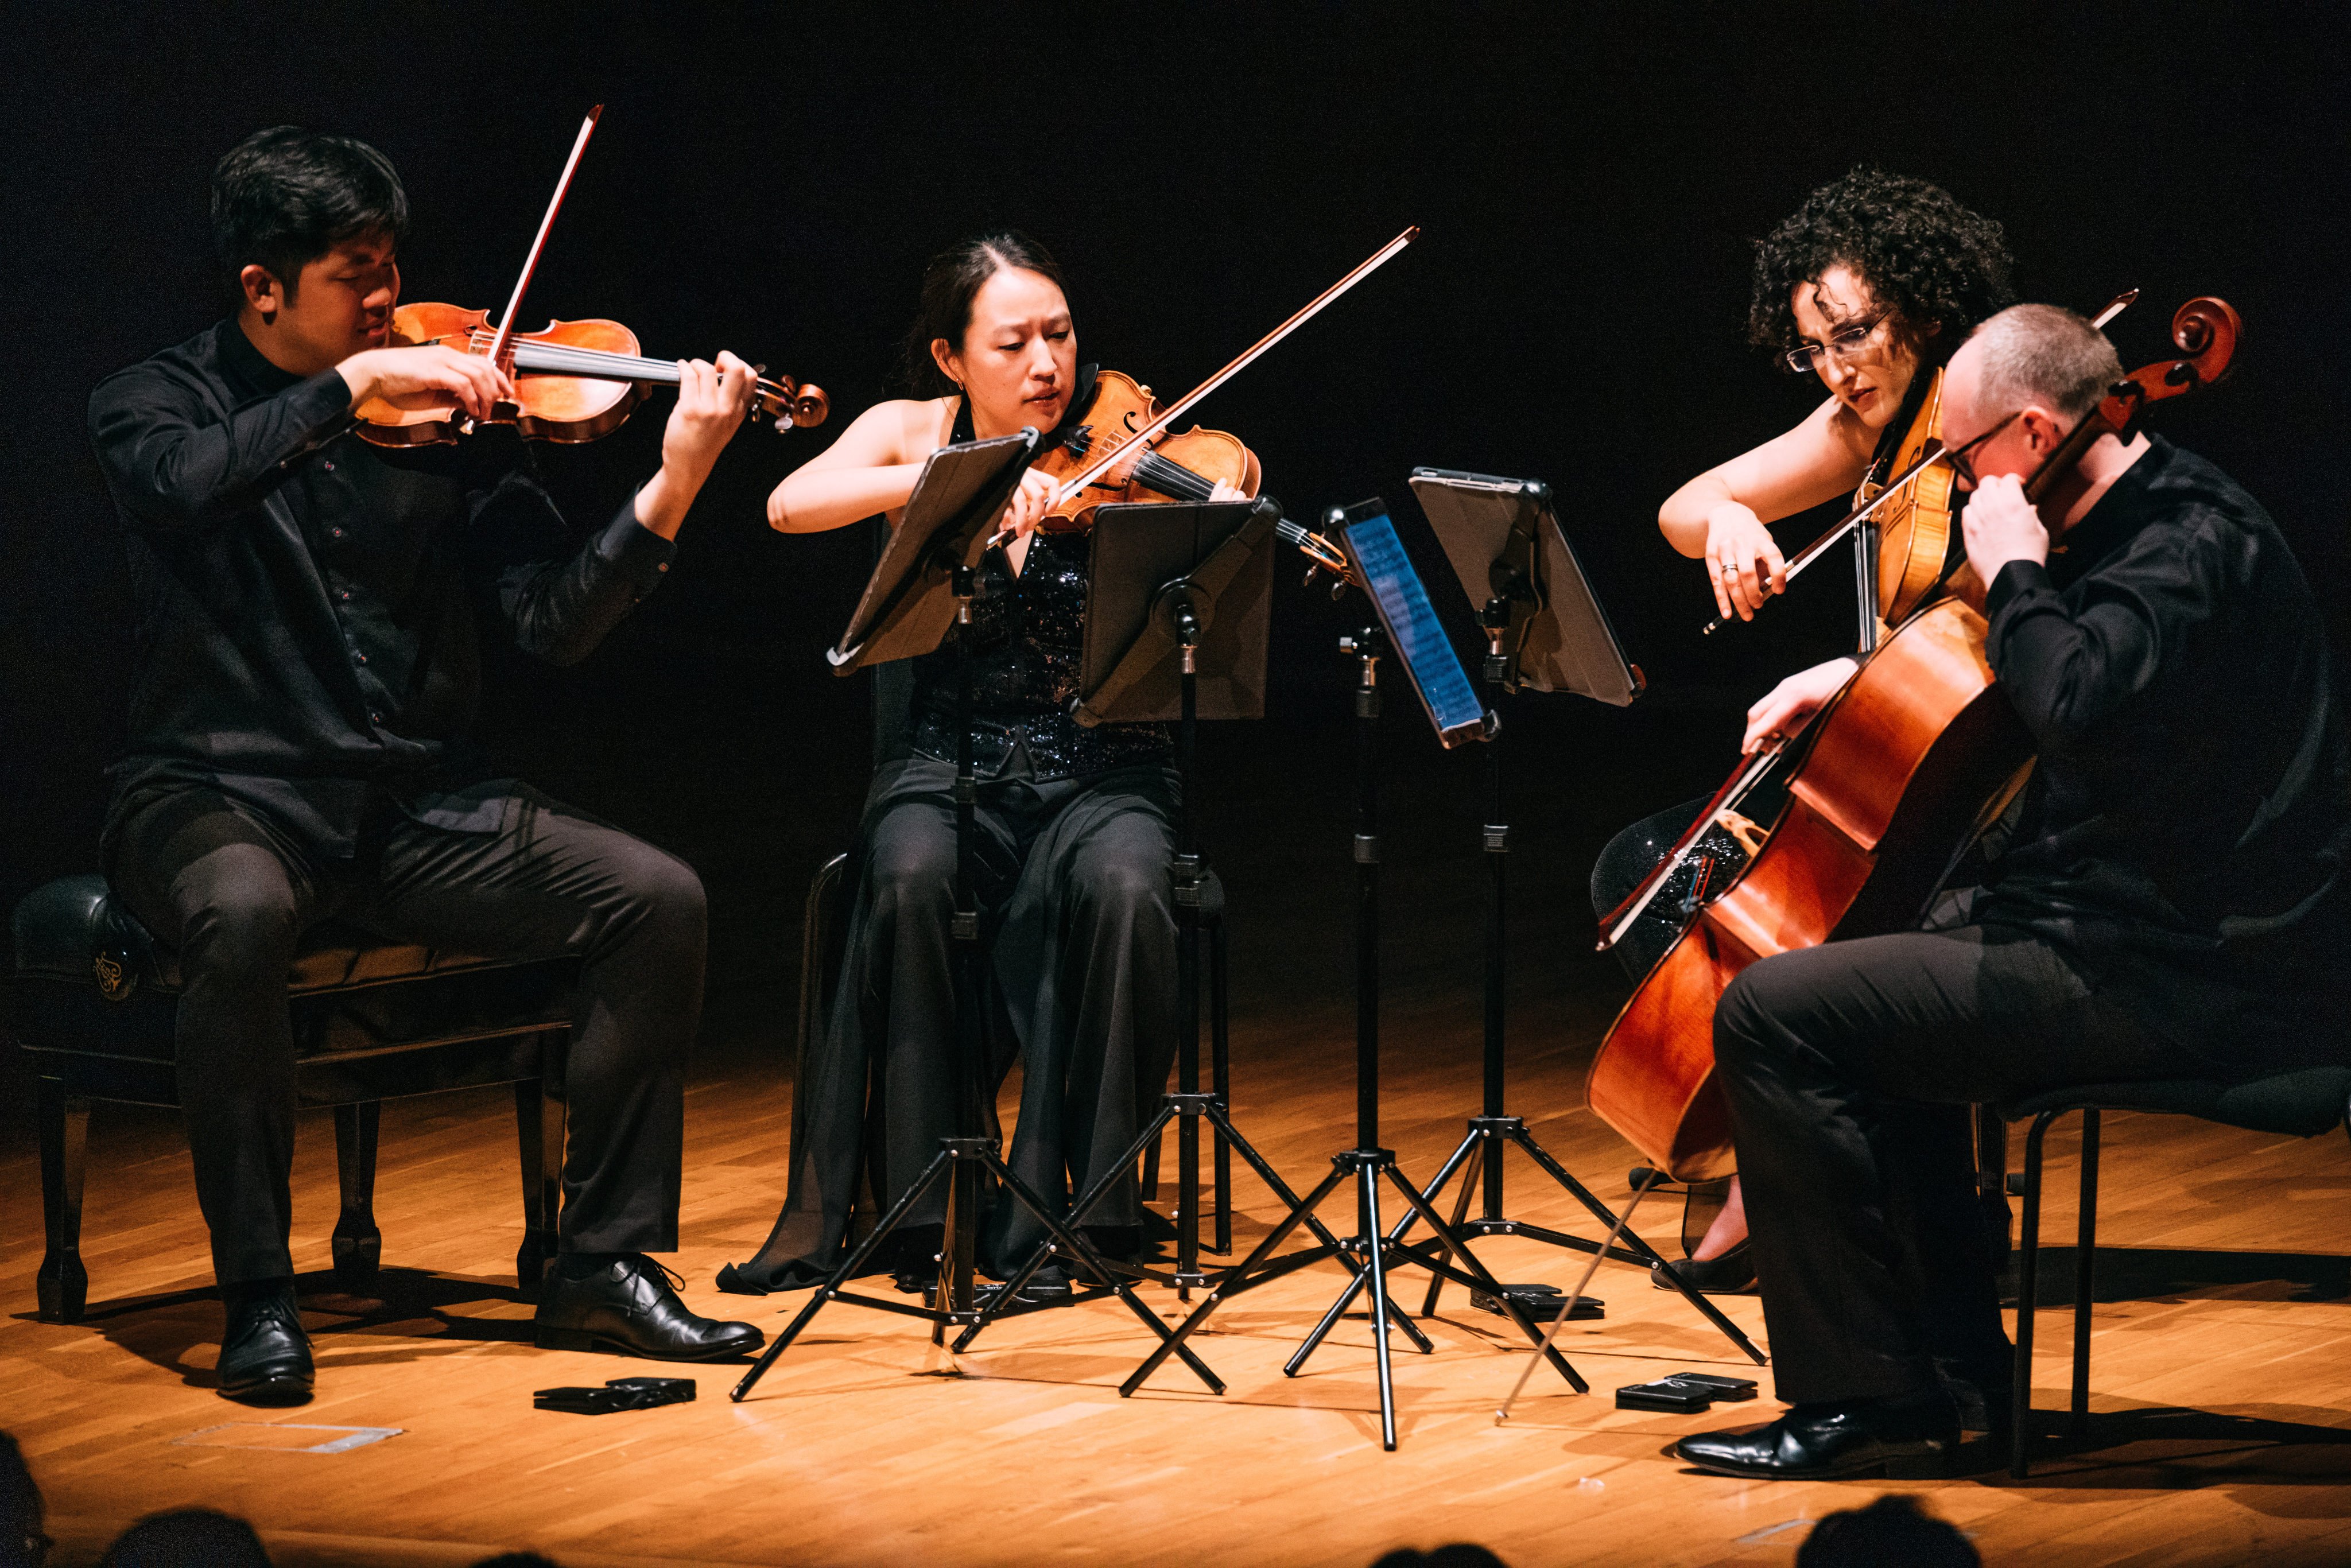 The Verona Quartet performing on May 22, 2023 at the Hong Kong City Hall. The concert, part of the French May festival, was presented by Premiere Performances of Hong Kong. The programme featured works by Bartók, Ravel and Beethoven. Photo: Kenny Cheung / PPHK)